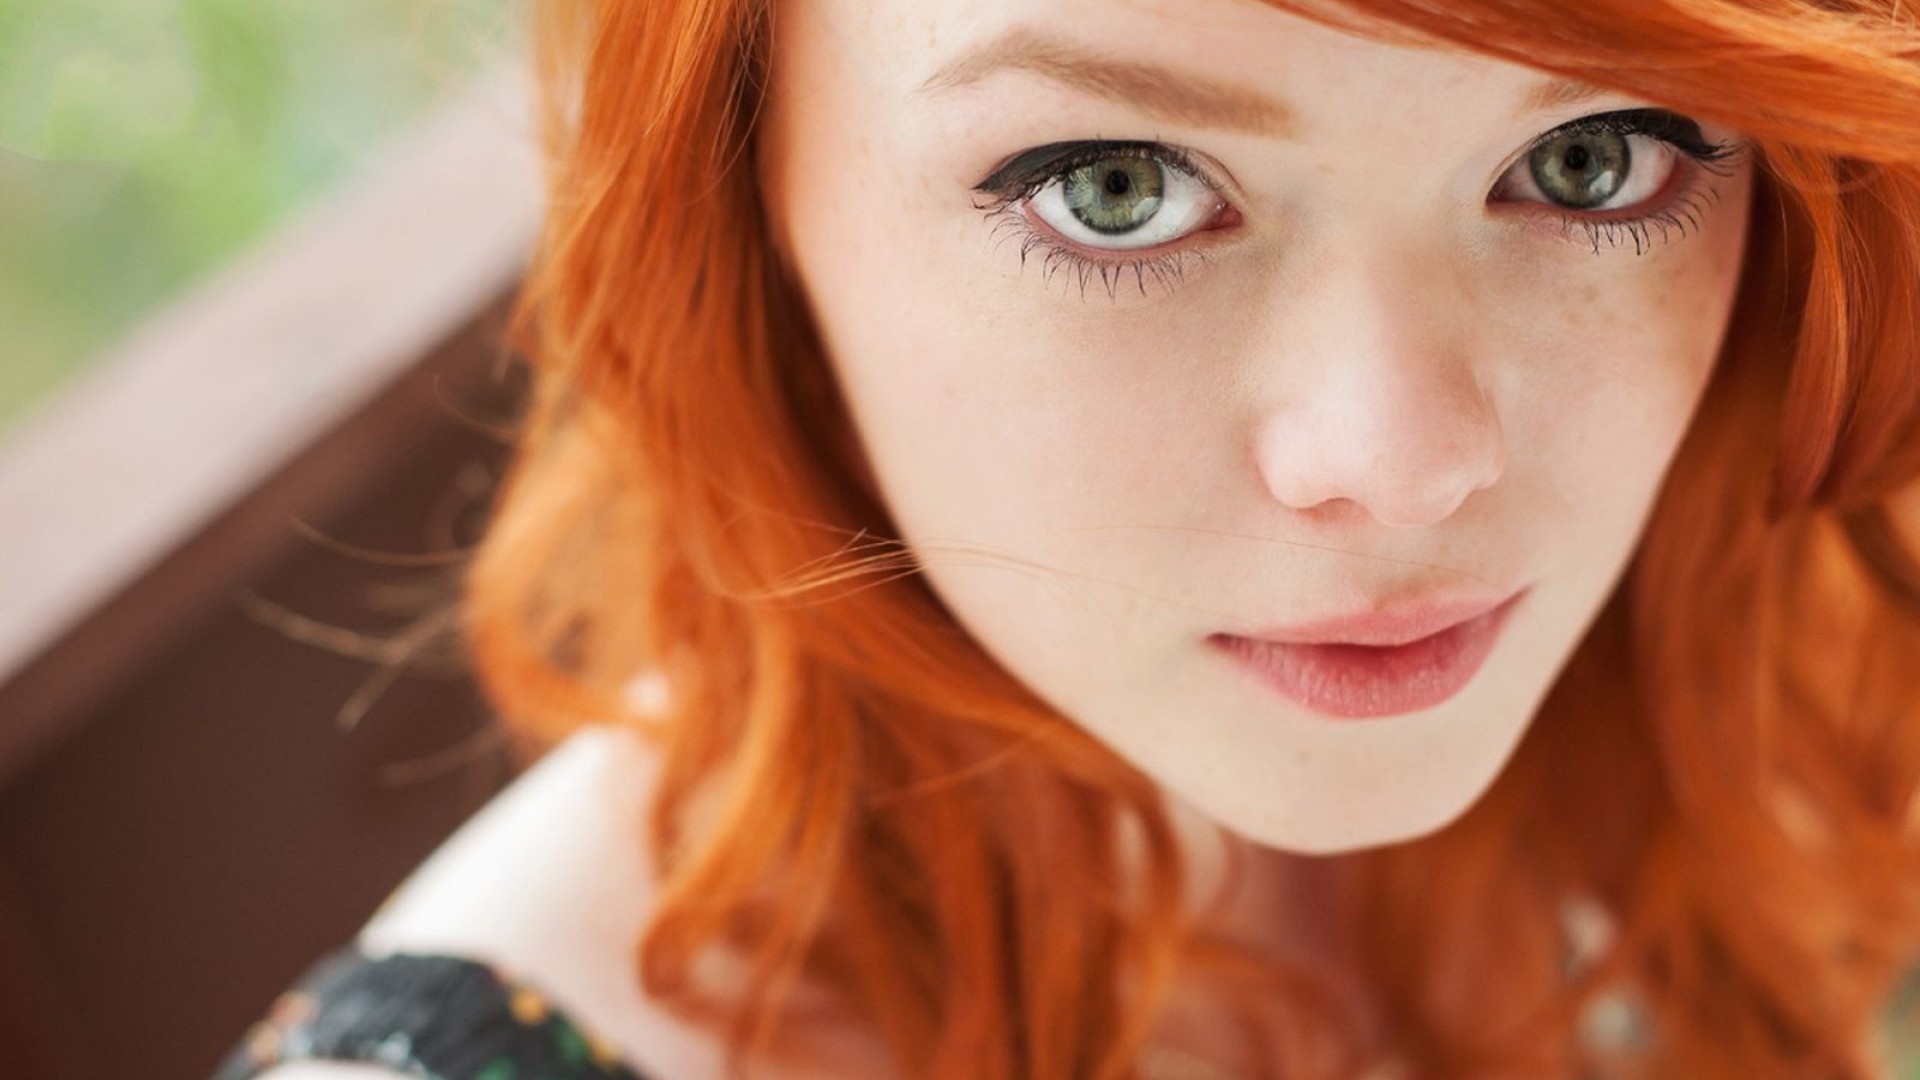 Redhead Women Model Face Green Eyes Wallpapers Hd Desktop And Mobile Backgrounds